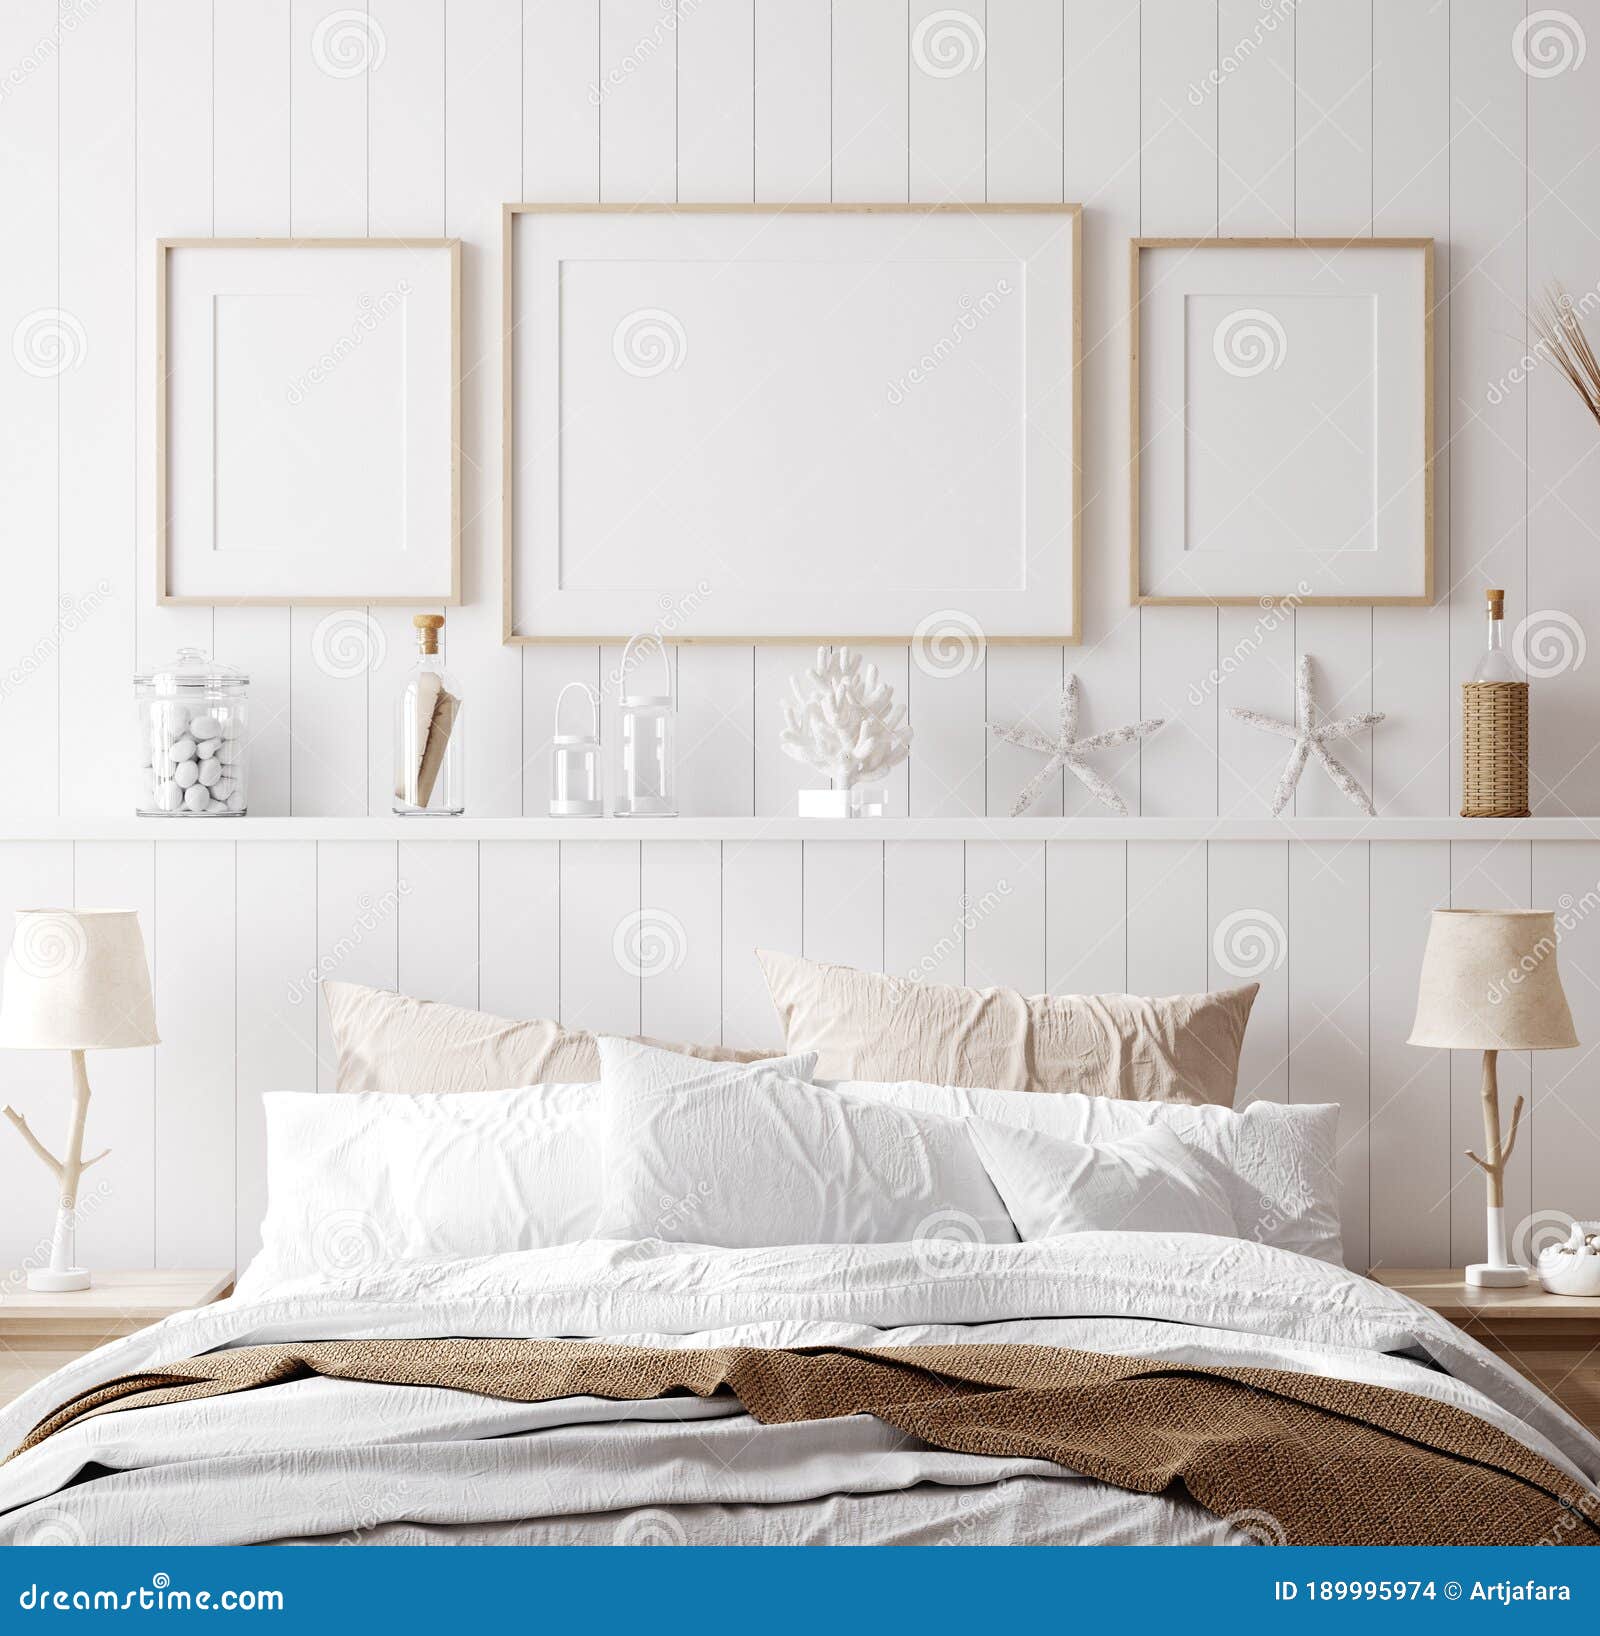 mock up frame in cozy home interior background, coastal style bedroom